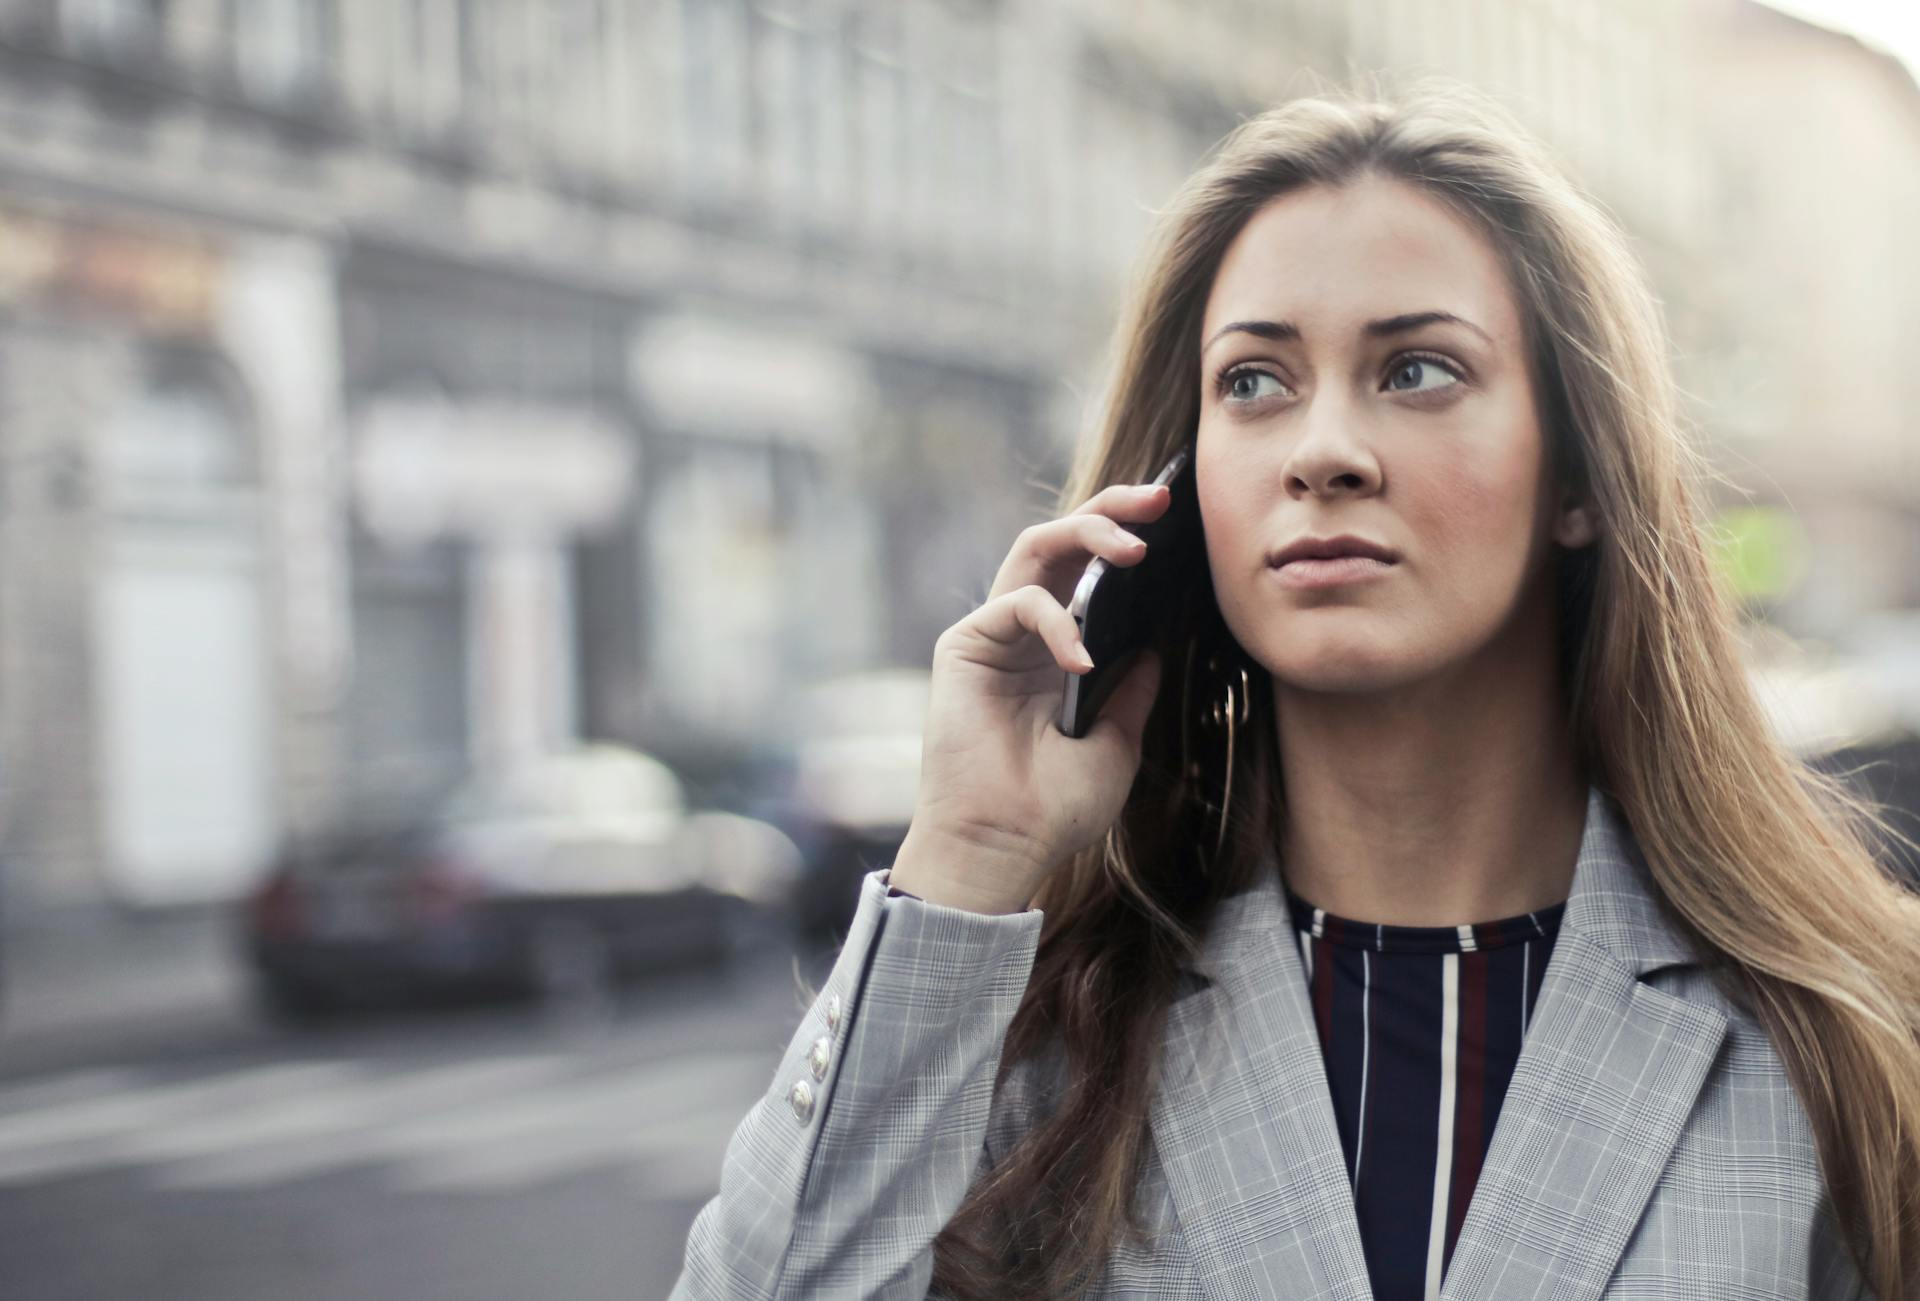 Woman walking on the street while speaking on her phone | Source: Pexels